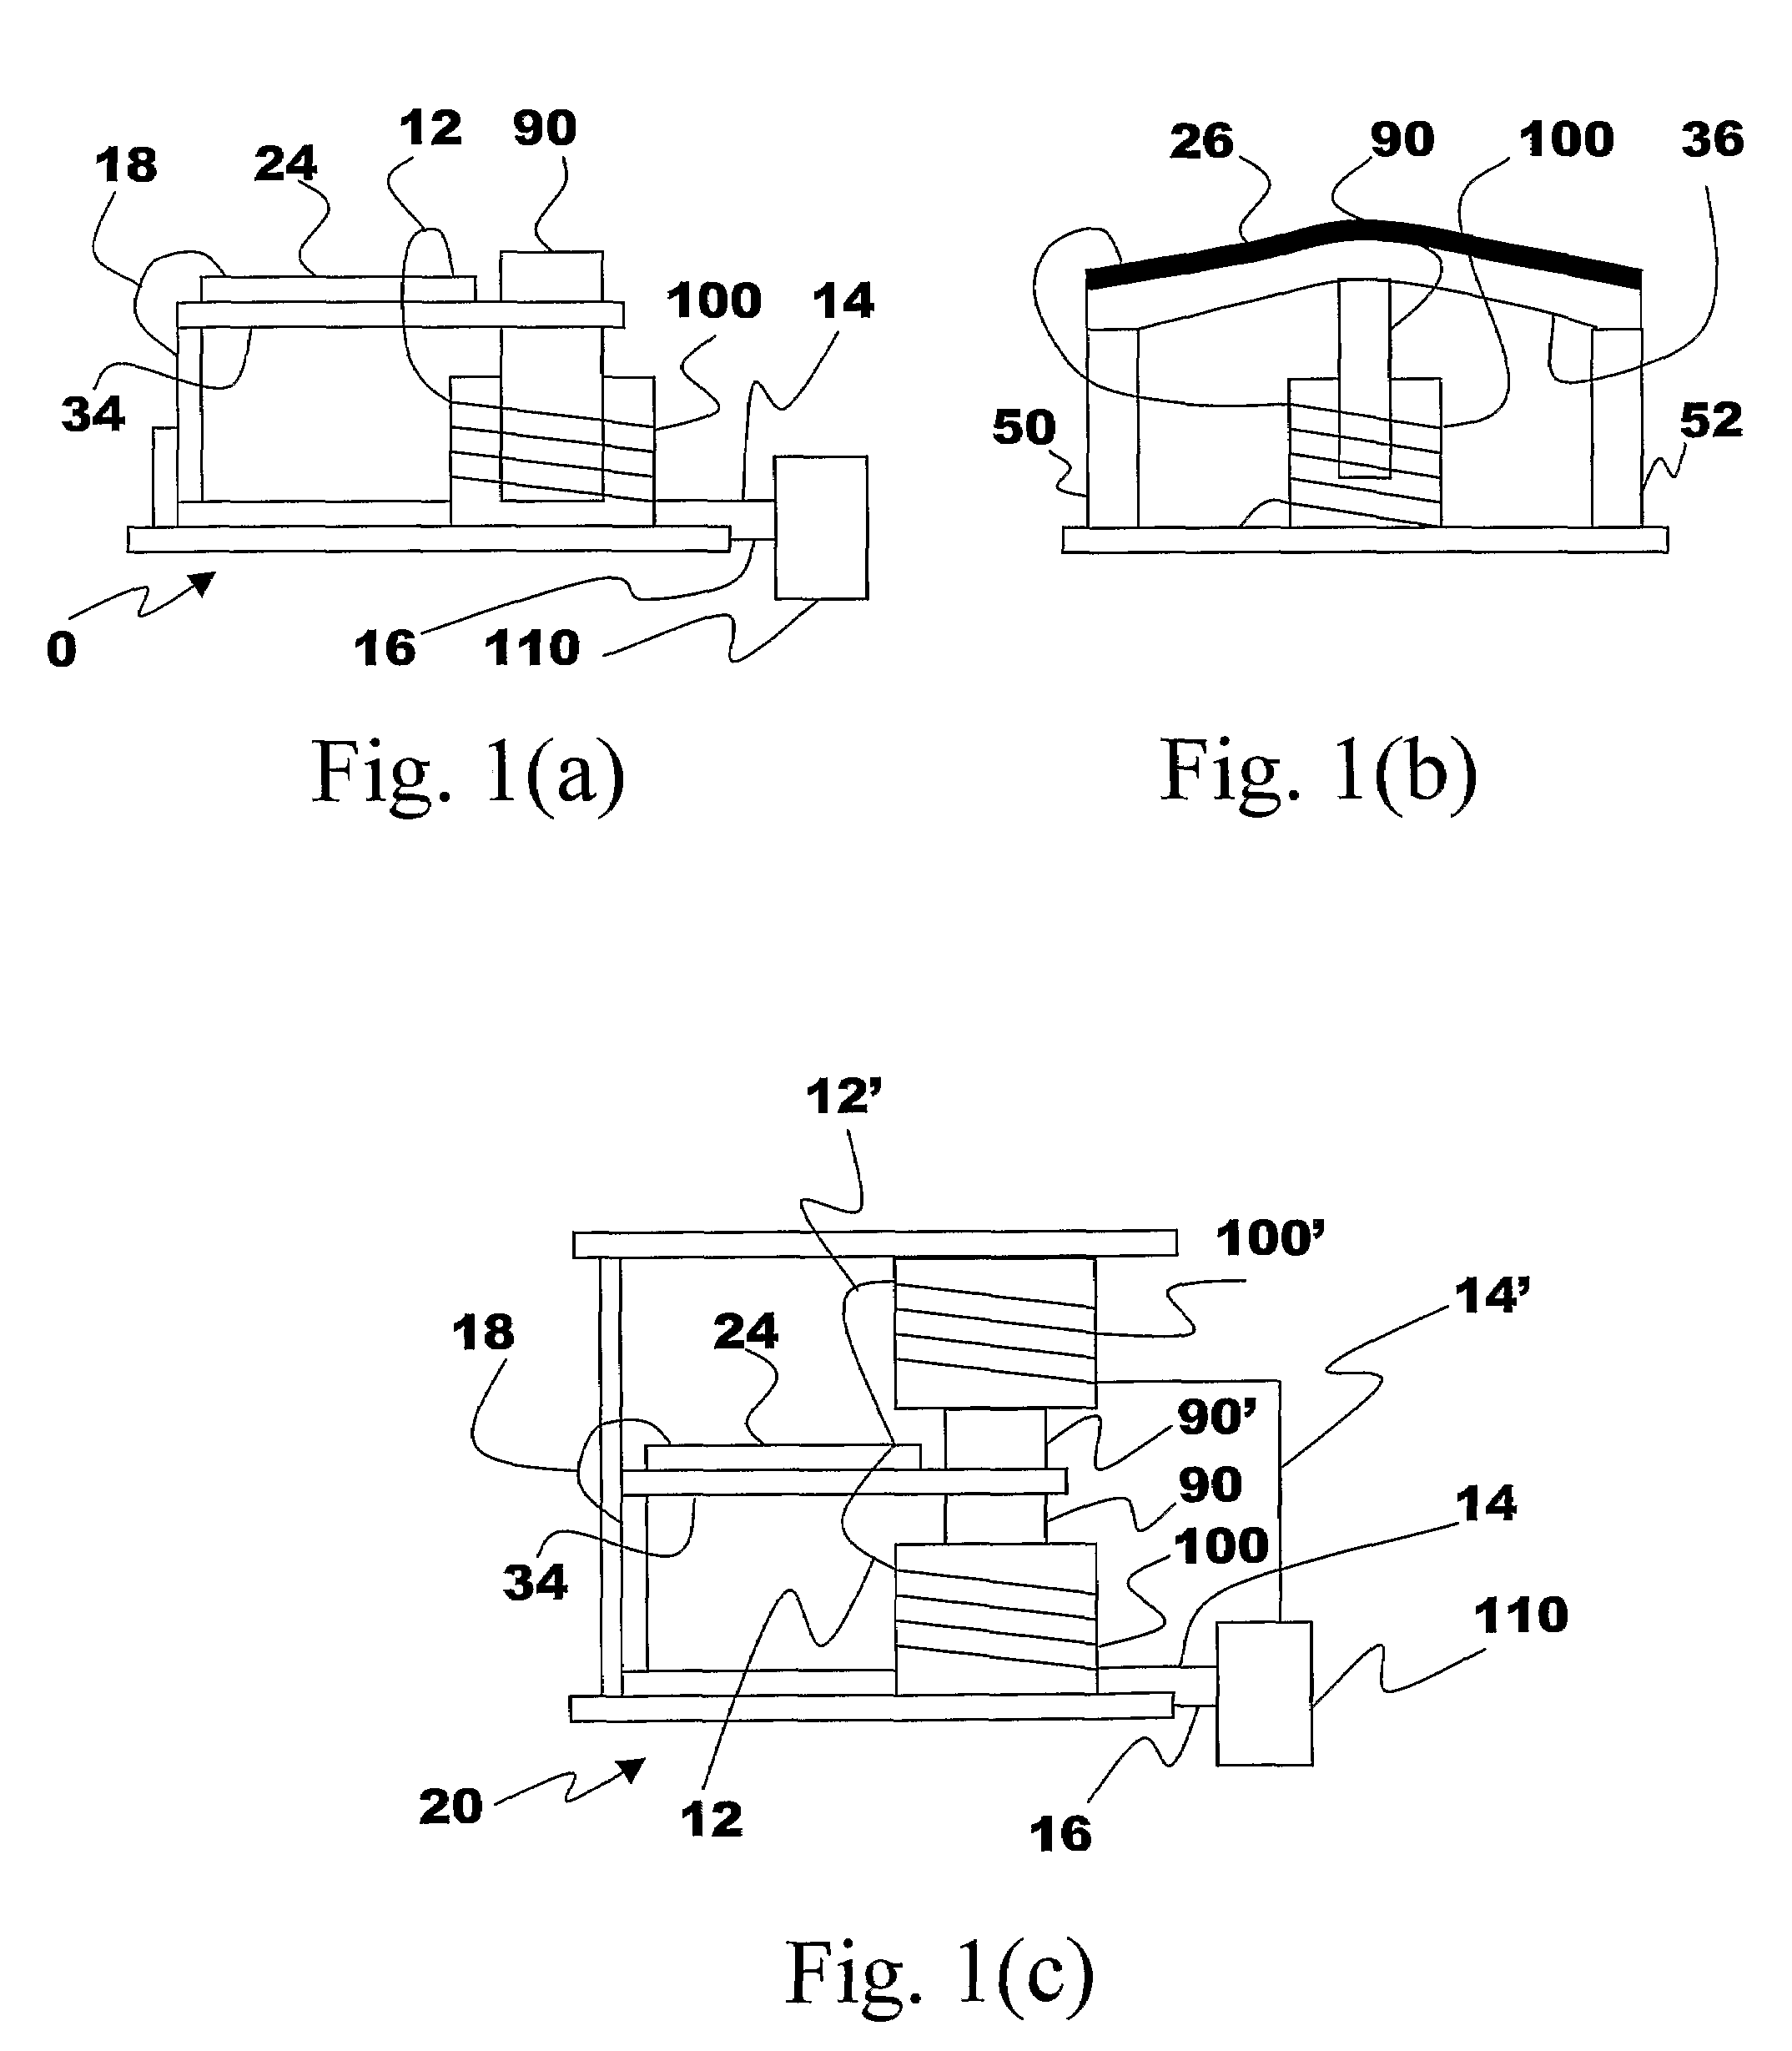 Energy harvester with adjustable resonant frequency